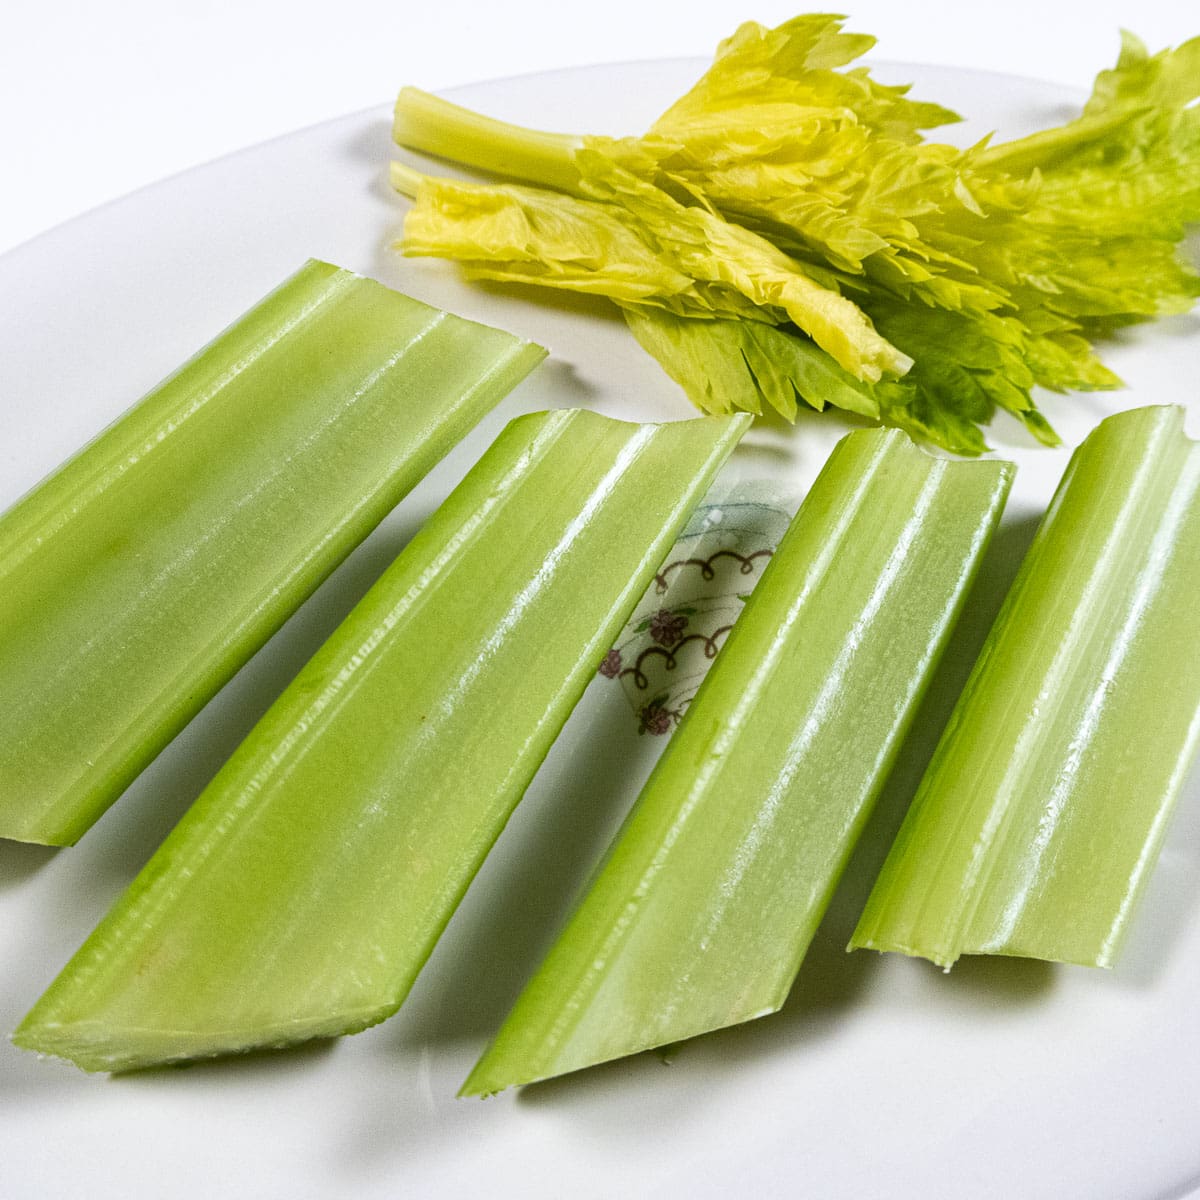 4 pieces of celery with celery leaves on a plate.